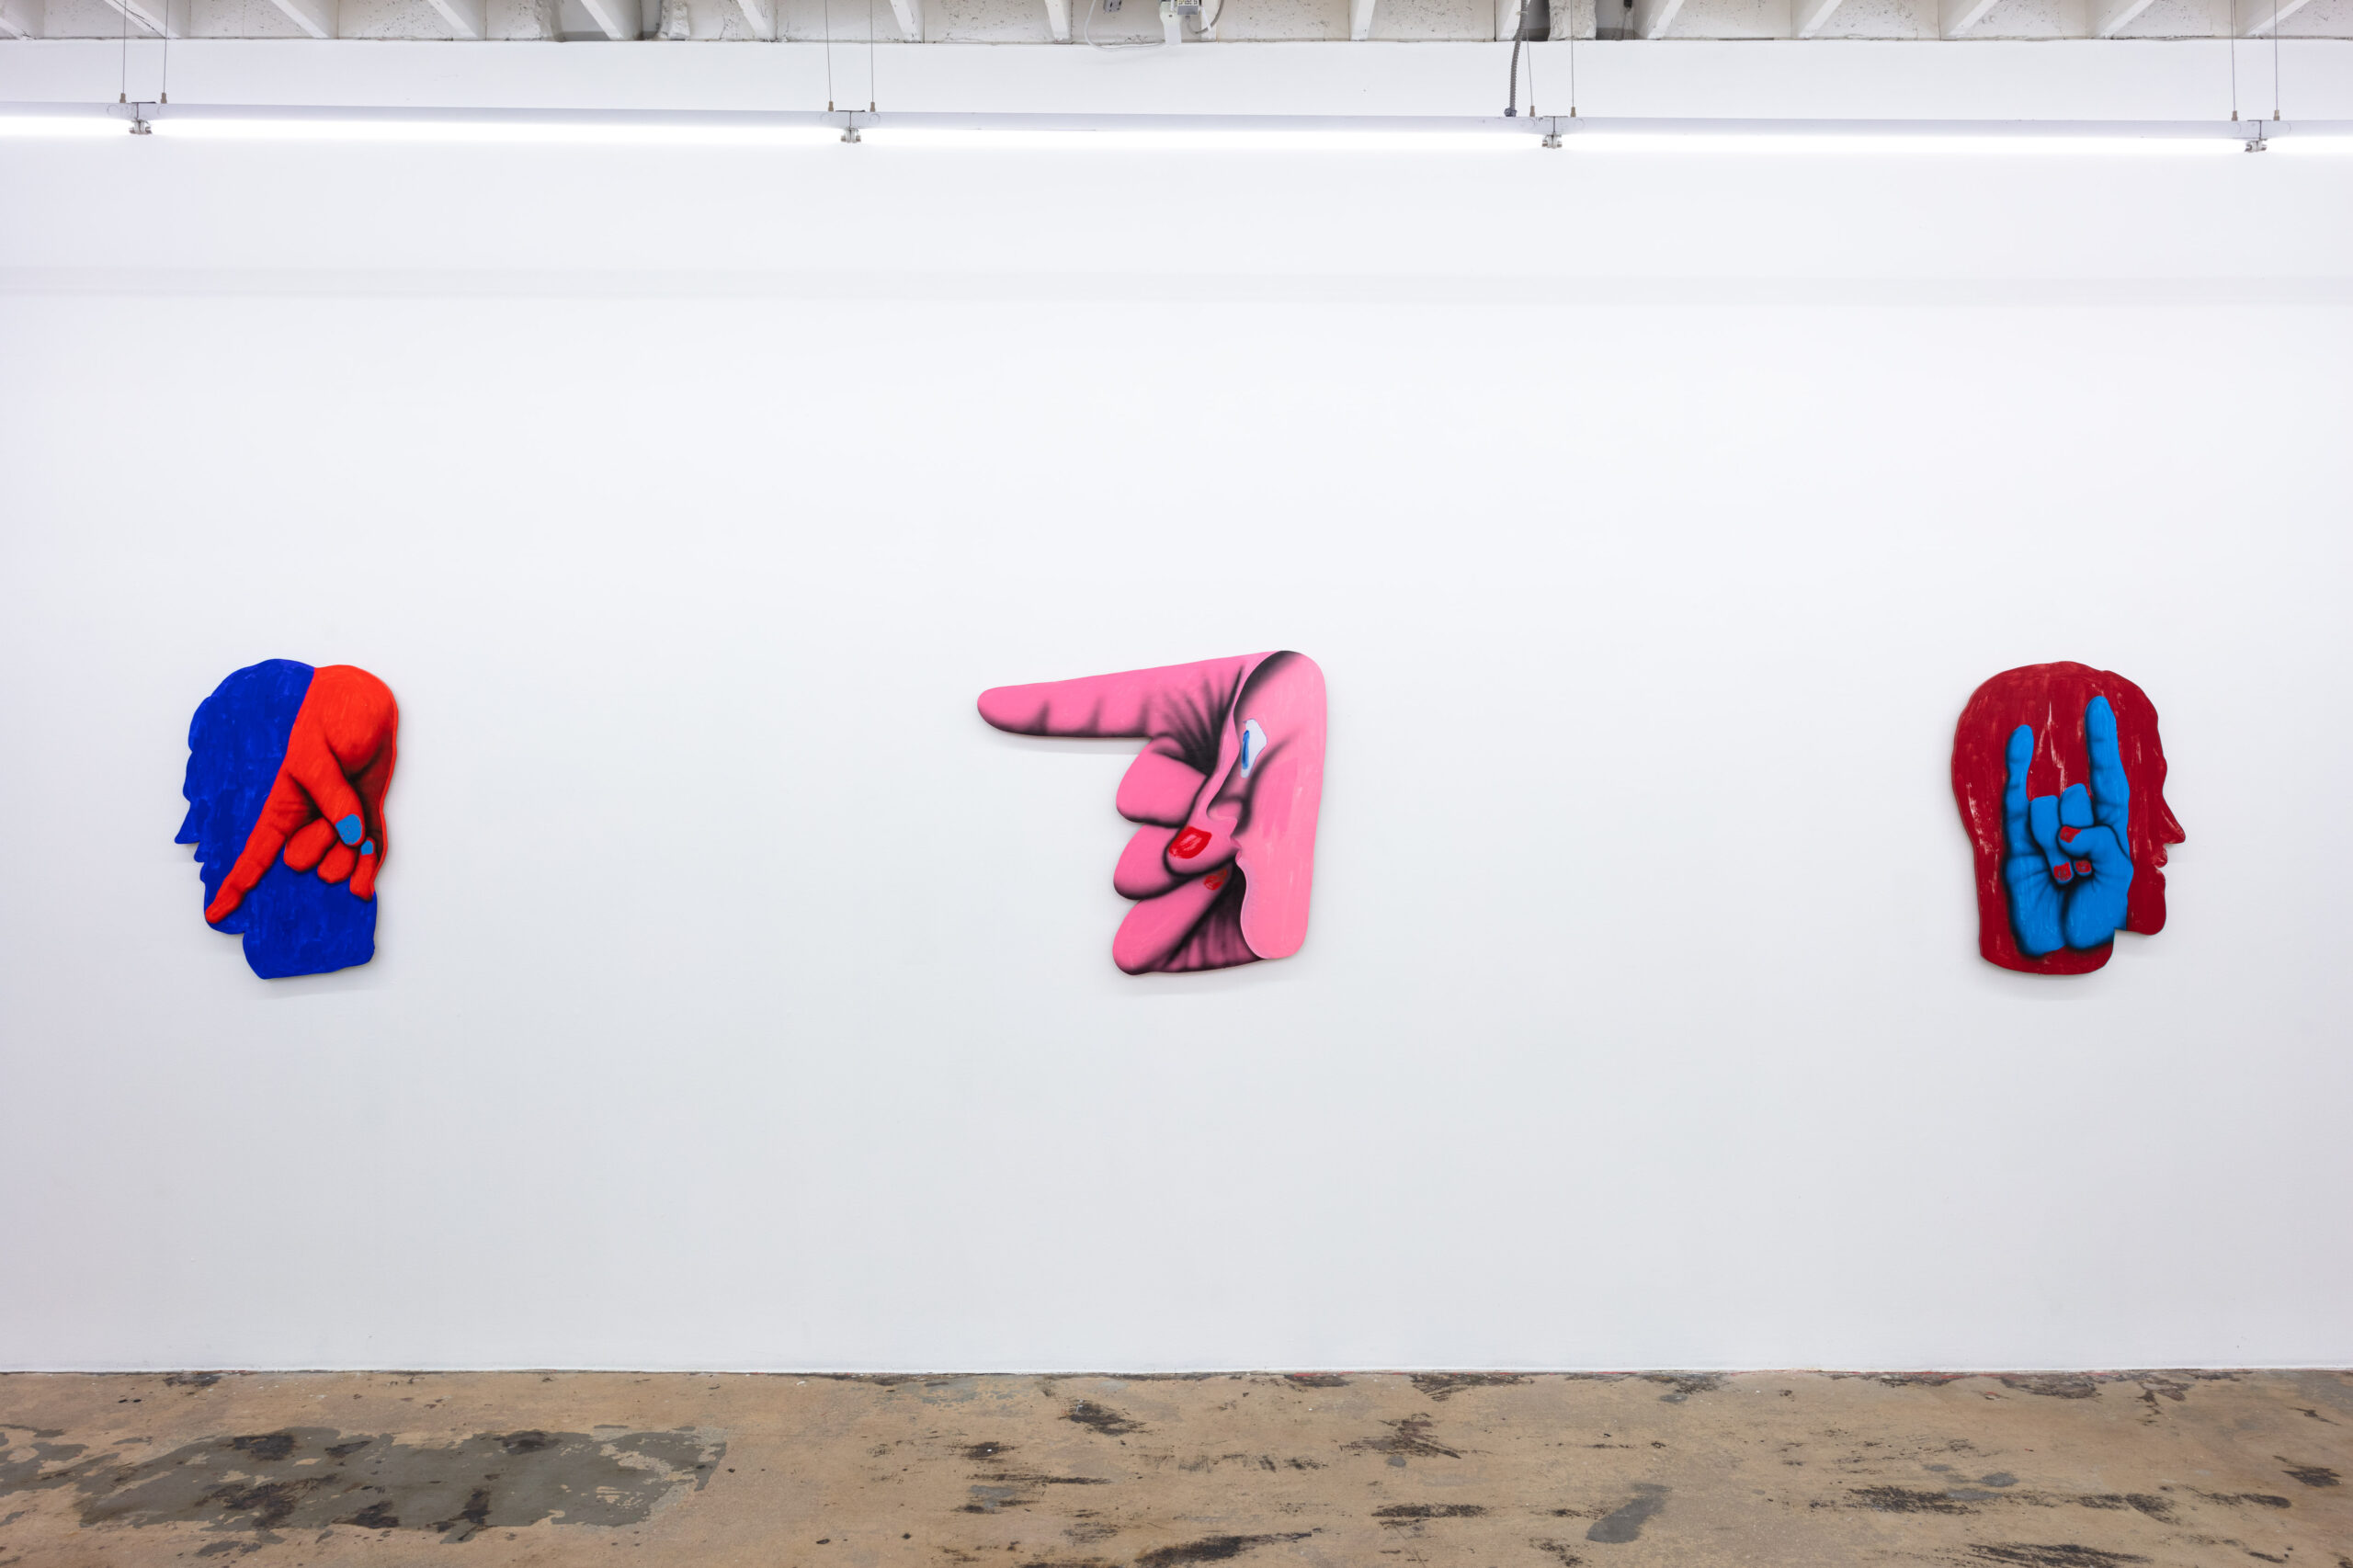 James English Leary, Patter, Installation View